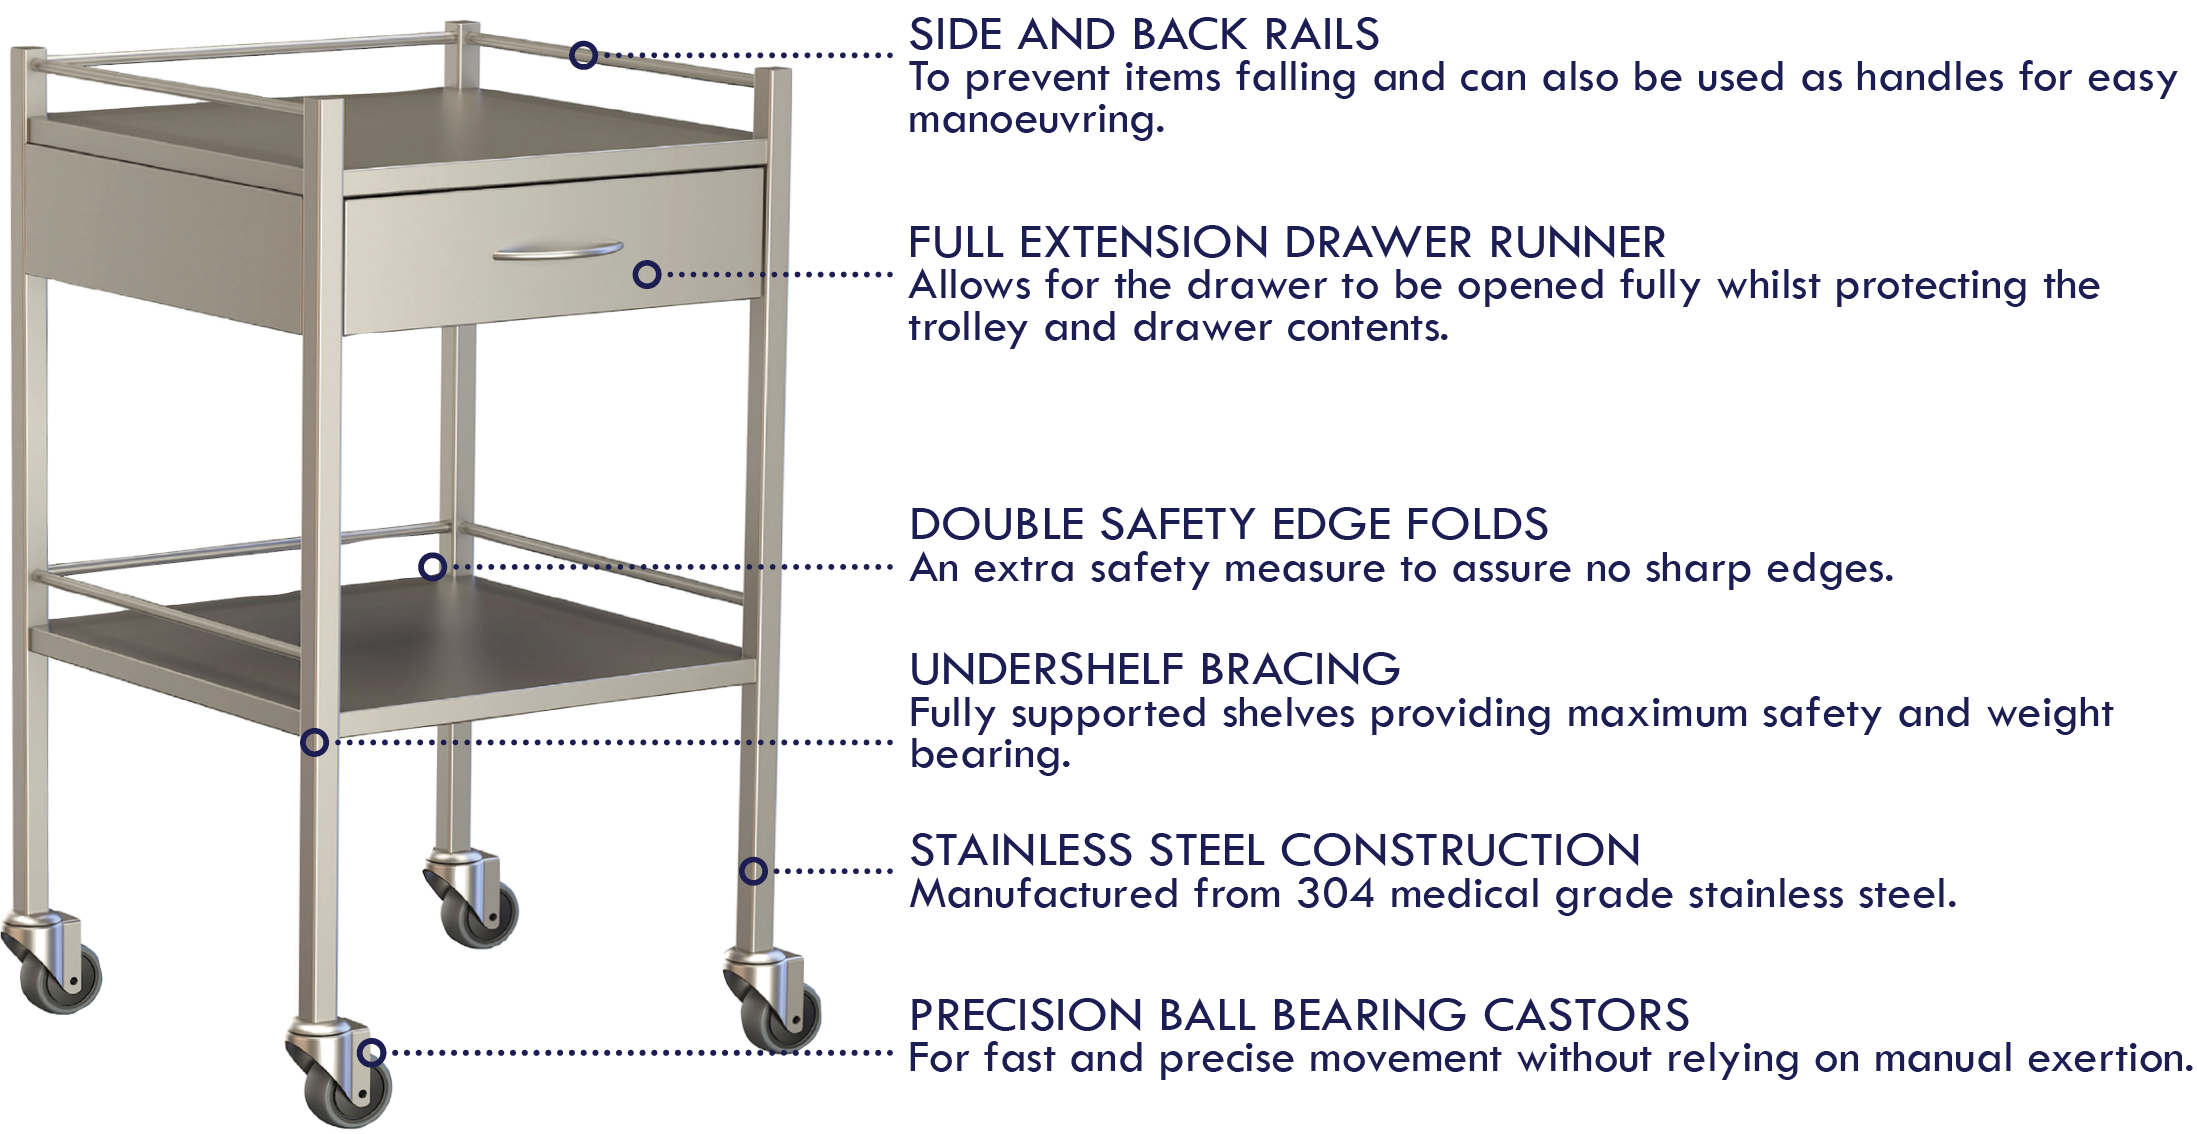 Signature Clinical Furniture Stainless Steel Trolley Features